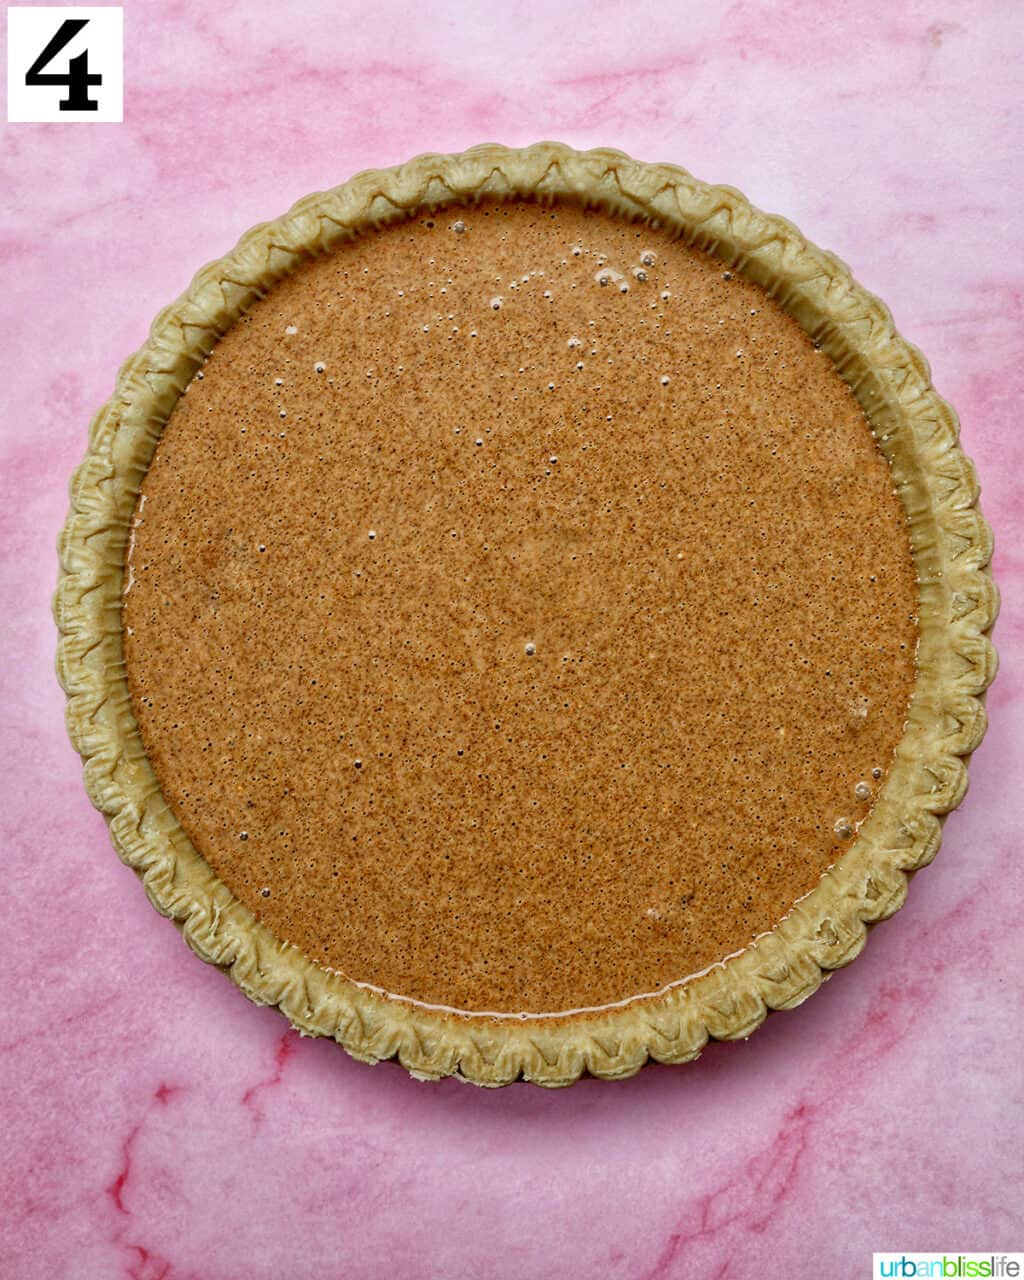 cinnamon pie on a pink background.